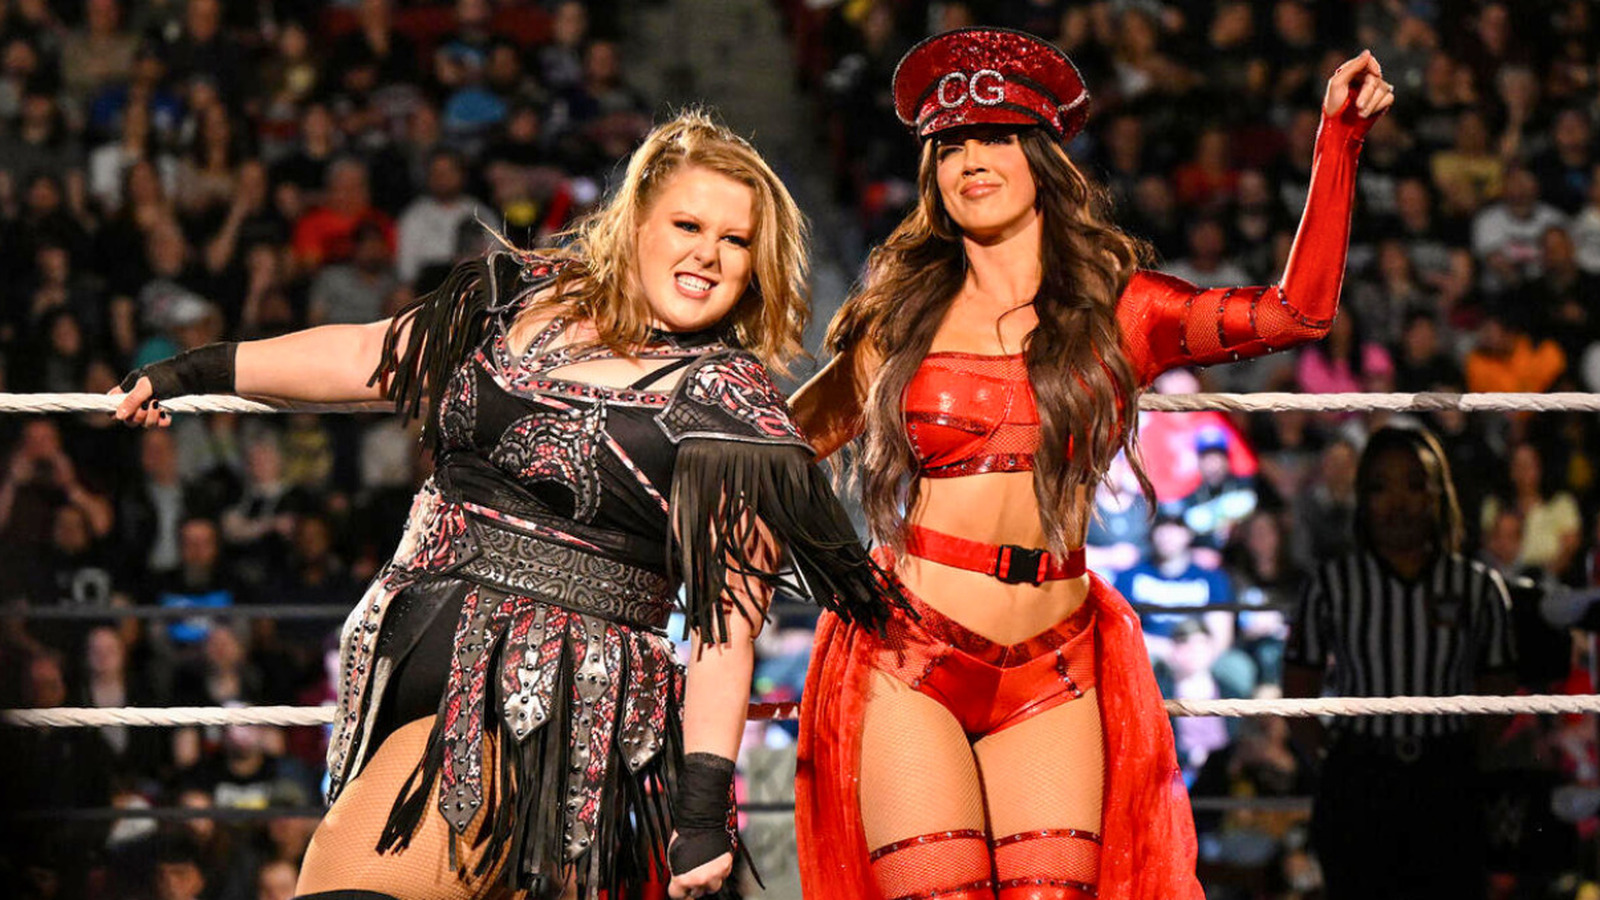 Chelsea Green Discusses Relationship With Fellow WWE Star Piper Niven